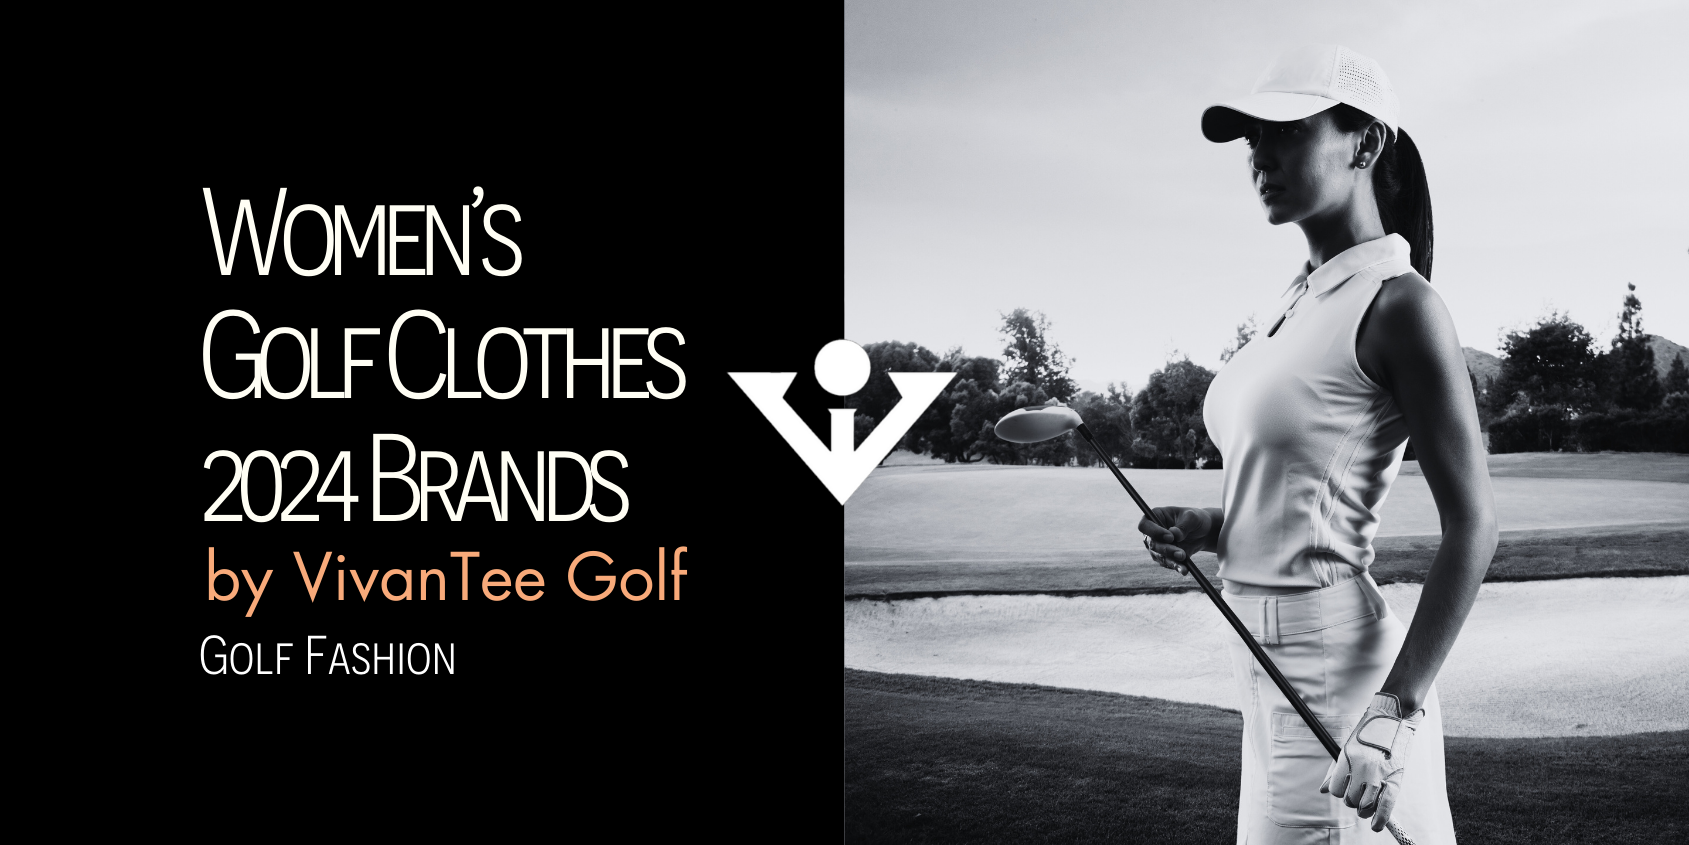 A fashionable women's golfer holding a golf club in our signature blog banner style, highlight our women's golf clothes brands in 2024